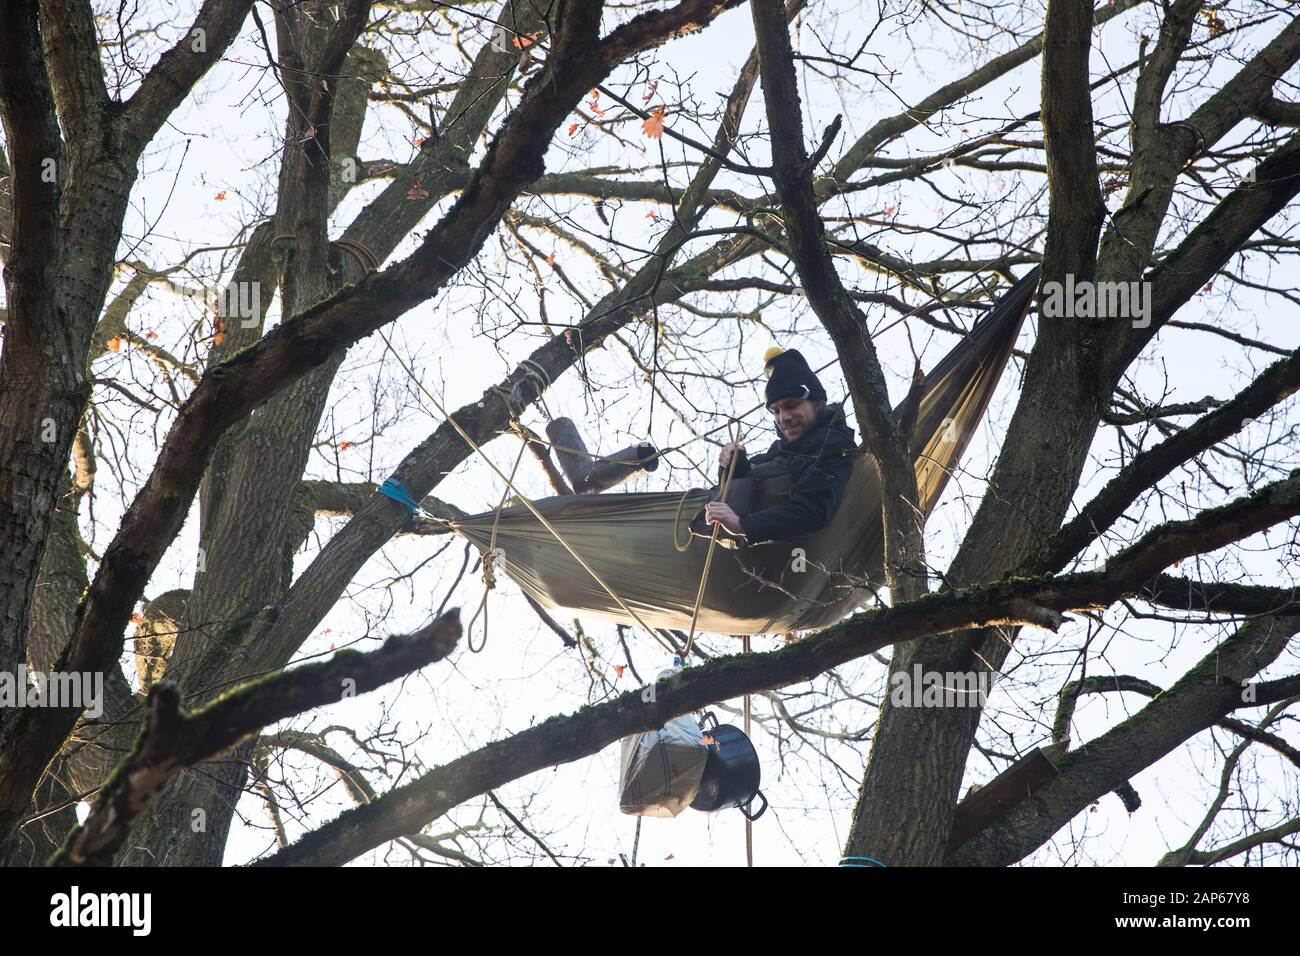 Harefield, UK. 21 January, 2020. An activist lying in a hammock suspended high up in a tree at the Save the Colne Valley wildlife protection camp hauls up a pot of breakfast porridge. Activists seeking to protect ancient woodland threatened by the HS2 high-speed rail link continue to occupy both the roadside and woodland sites of the camp having retaken it from bailiffs acting on behalf of HS2 on 18th January. 108 ancient woodlands are set to be destroyed by HS2. Credit: Mark Kerrison/Alamy Live News Stock Photo